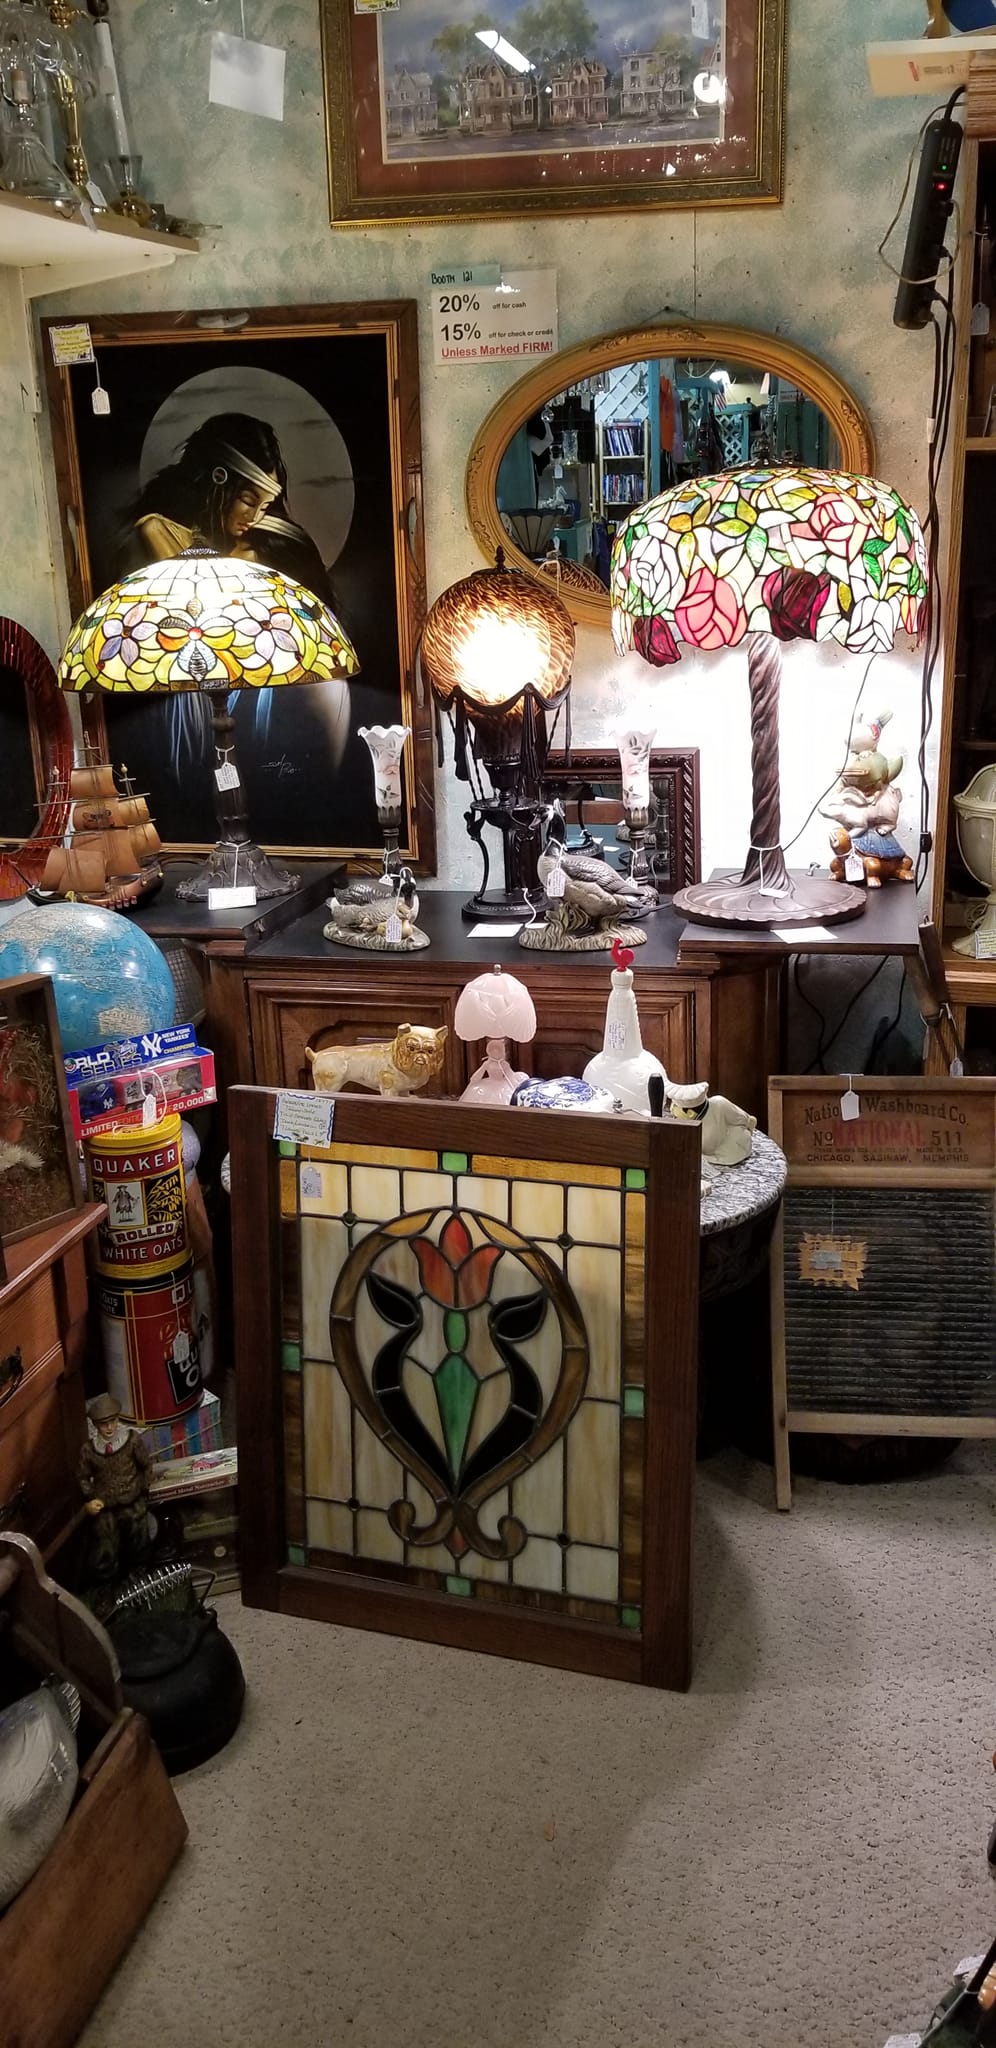 Scranberry Snapshots - Tosh's pick of the day! - Scranberry Coop - Vintage Store - Antiques, Collectibles, & More